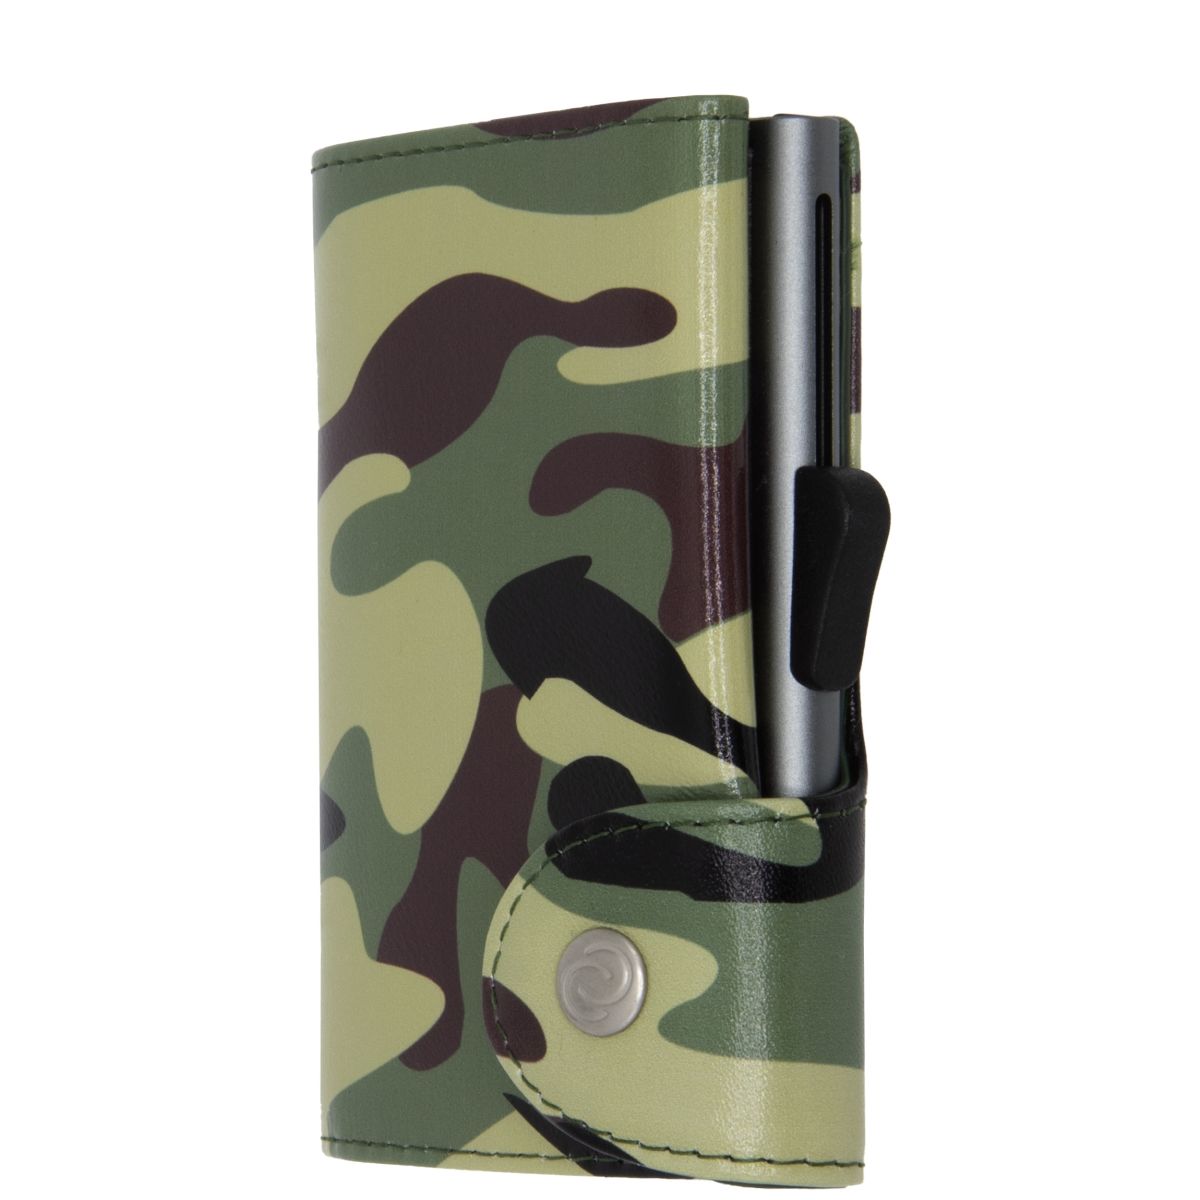 C-Secure Aluminum Card Holder with Genuine Leather - Camo Green